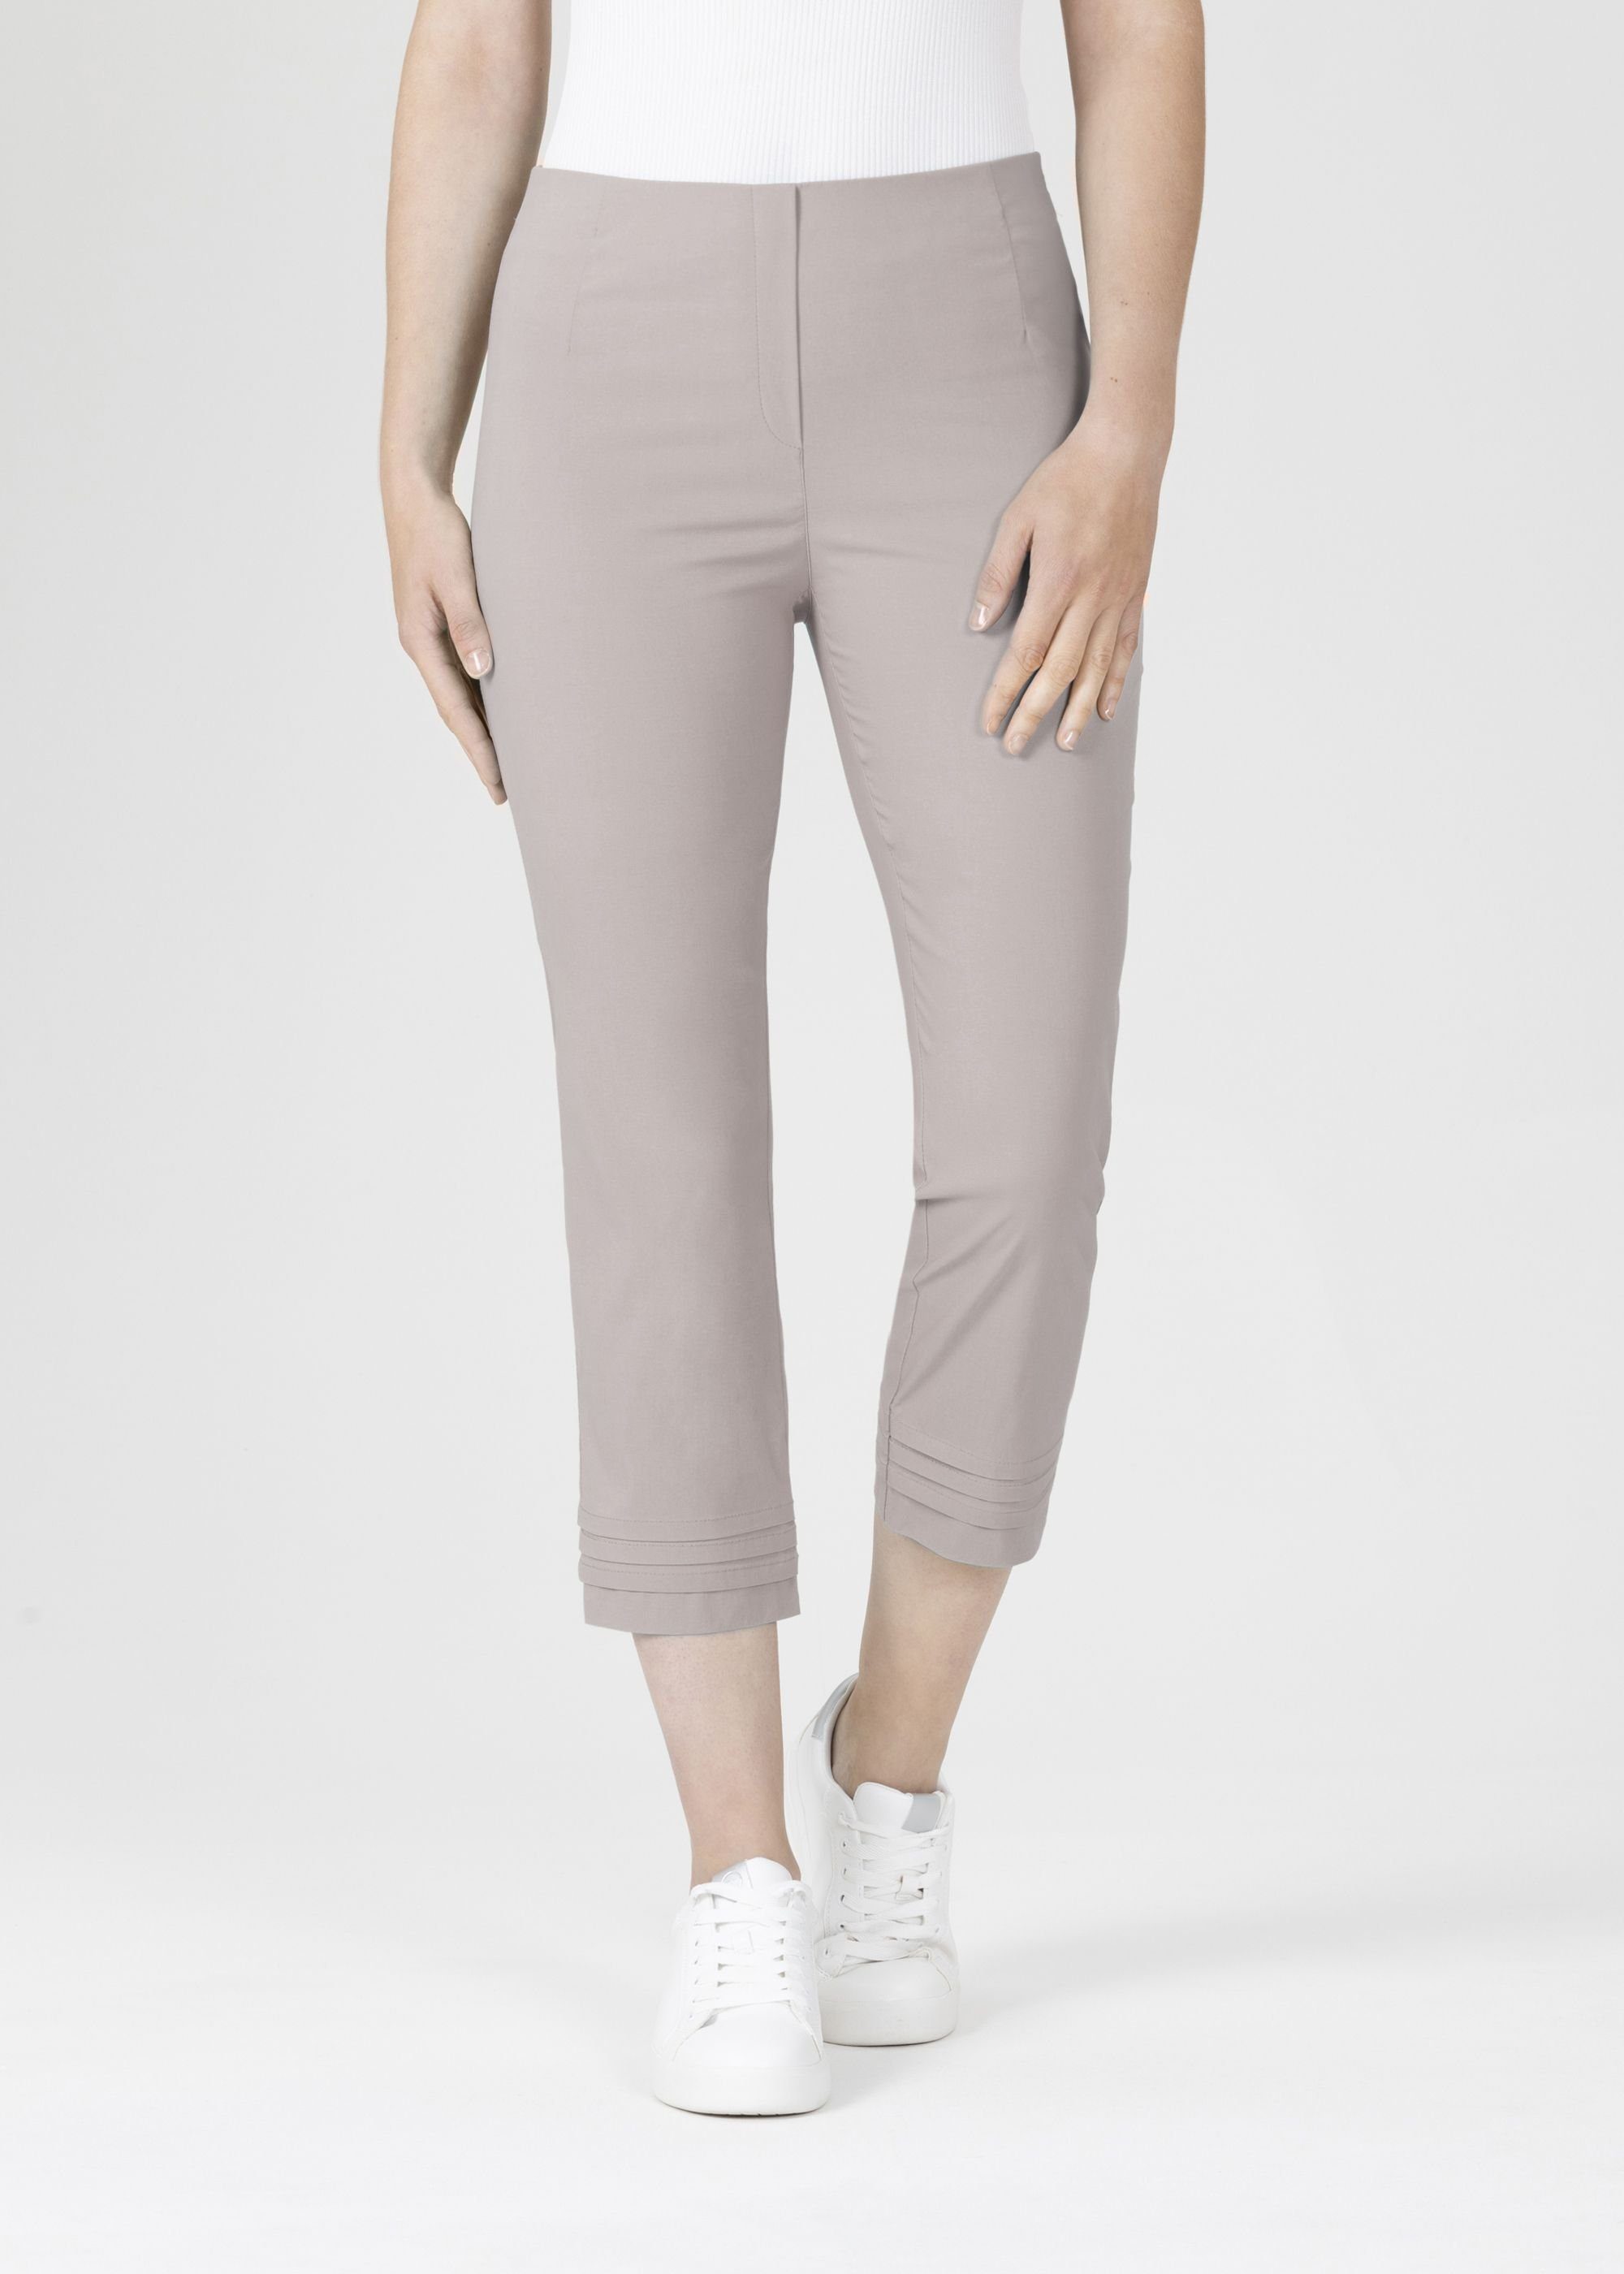 mit simply taupe Stehmann Stoffhose Faltendetails Ina